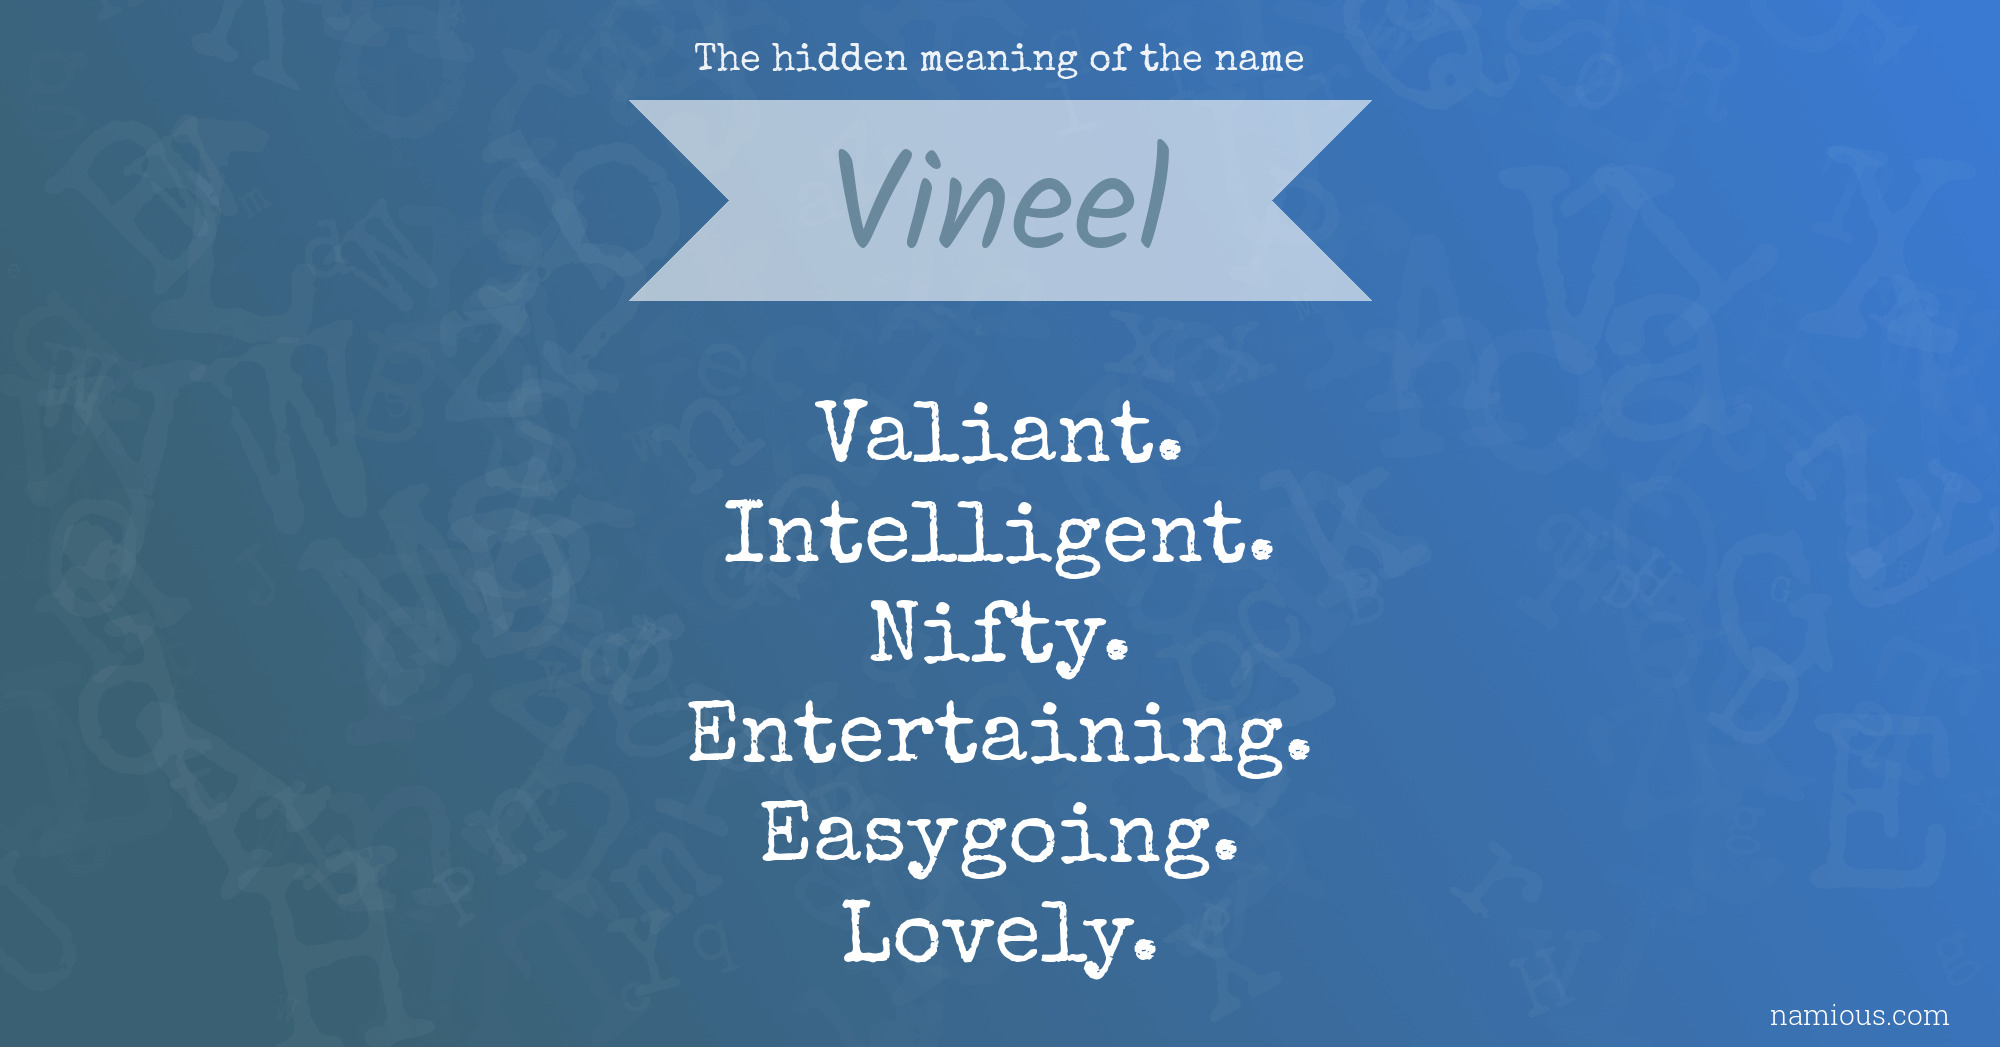 The hidden meaning of the name Vineel